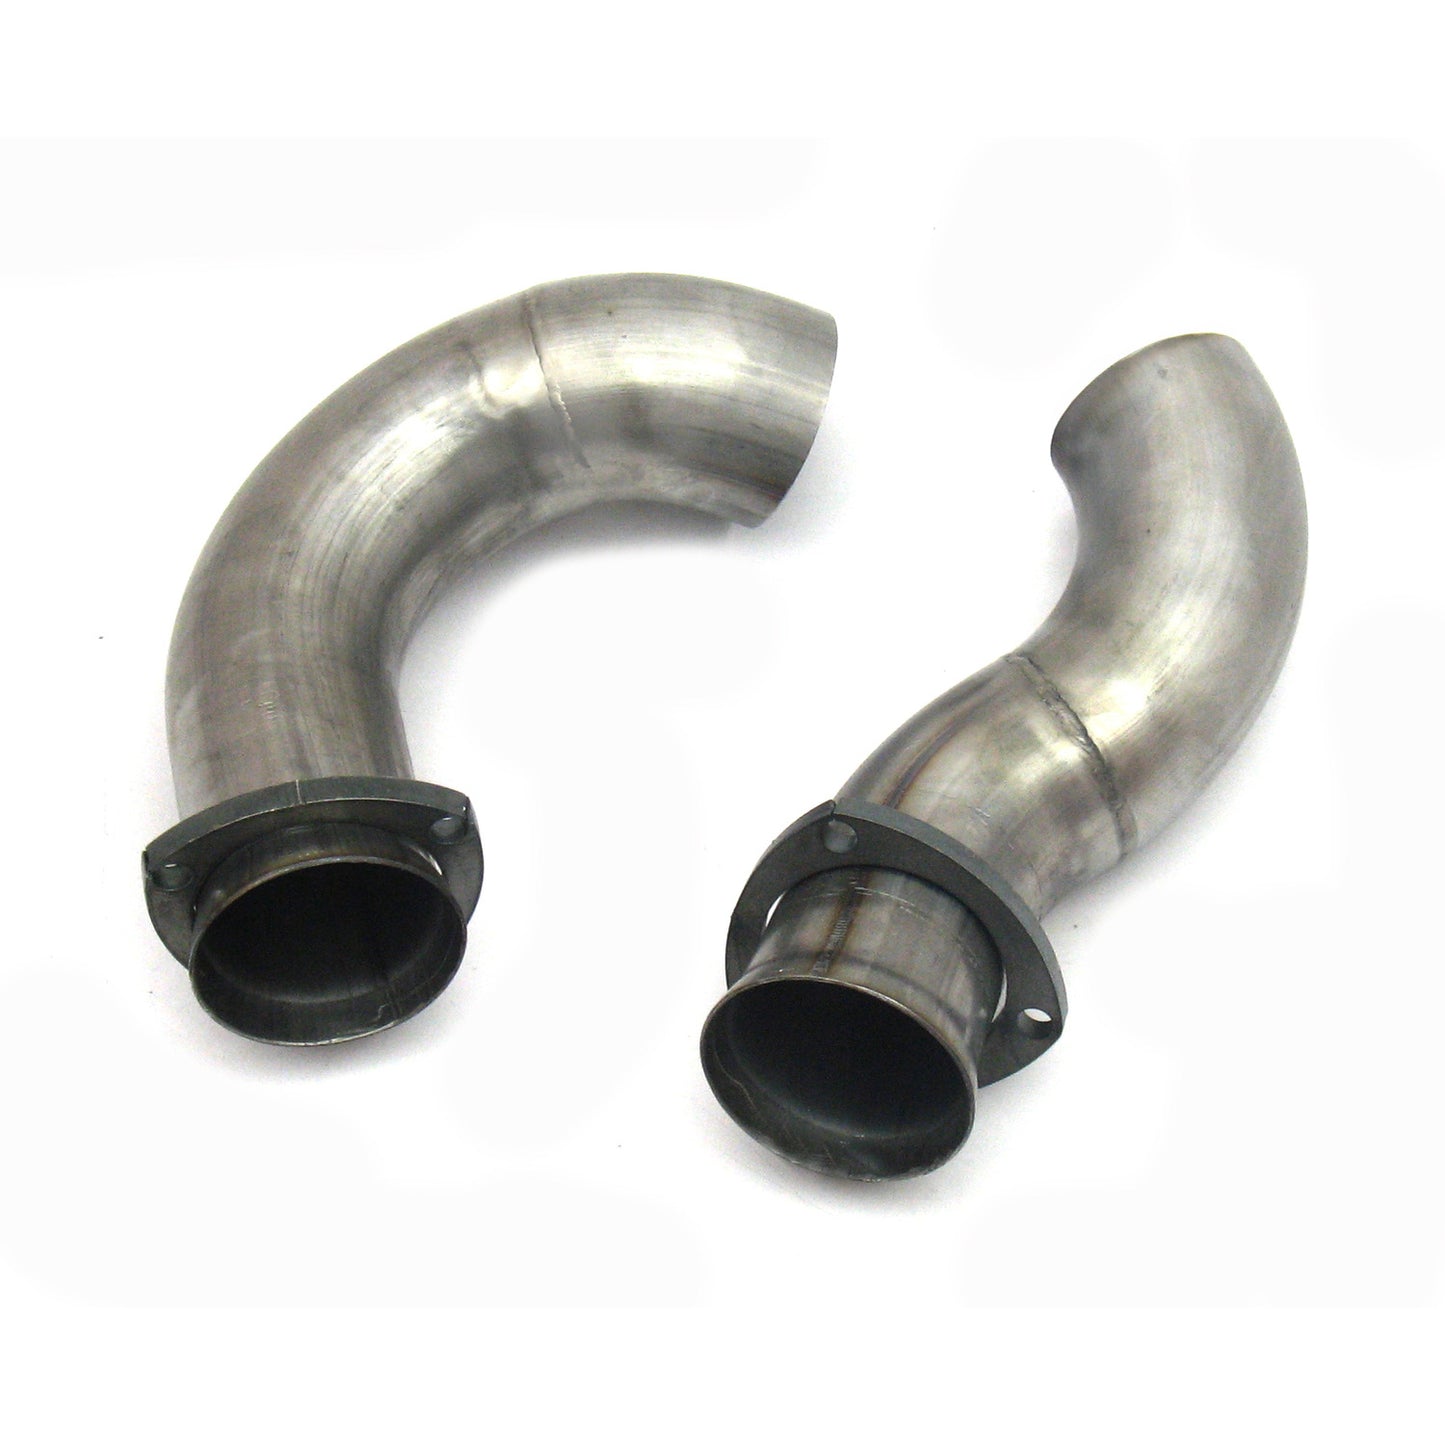 JBA Performance Exhaust 1860SY-1 3" Stainless Steel Mid-Pipe Down Pipes for 1860/61 not for Allison Transmission